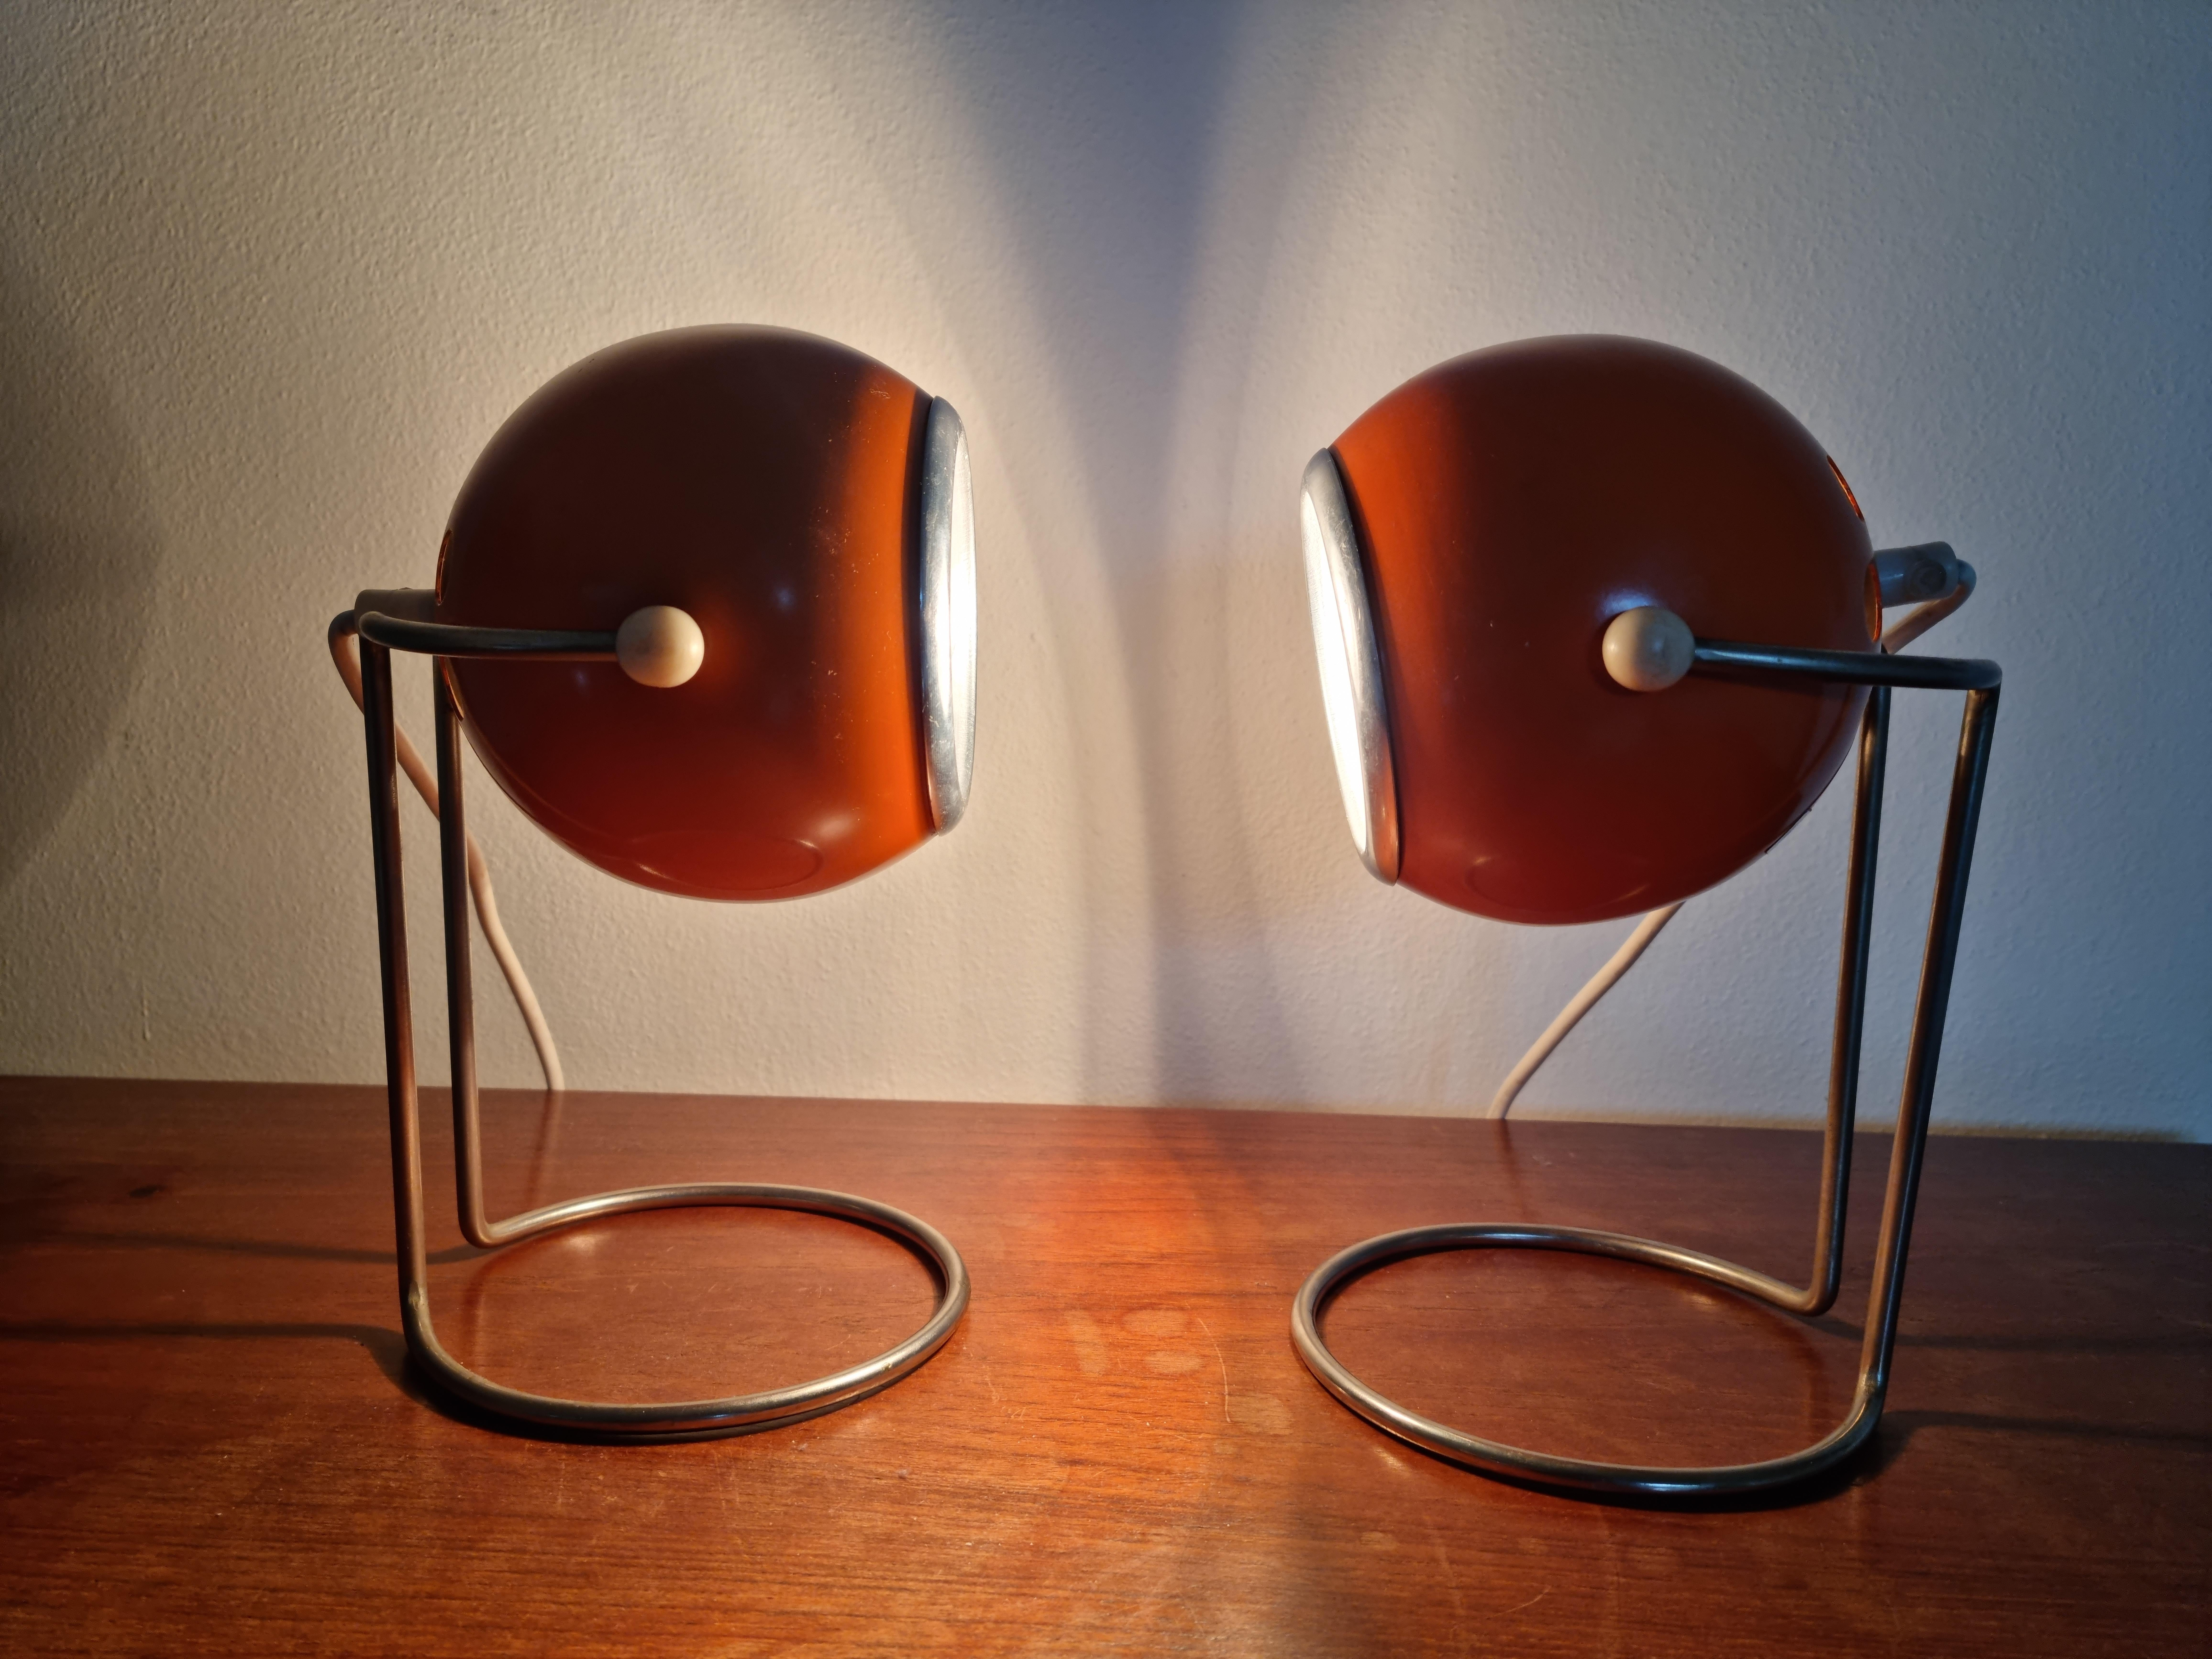 Pair of Midcentury Table Lamps, Eye Ball, 1970s For Sale 6